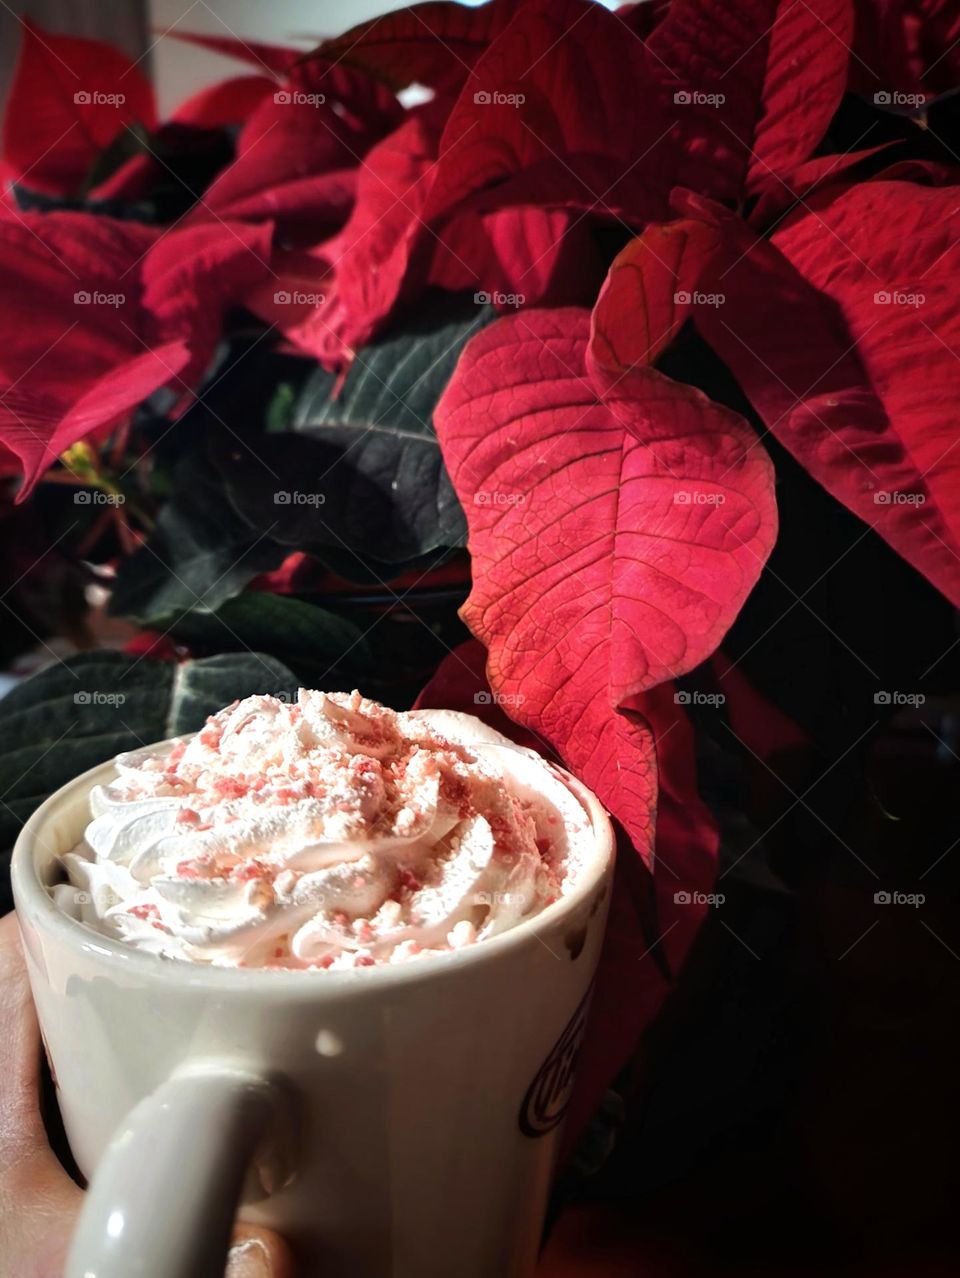 Candycane hot chocolate with a poinsettia background.